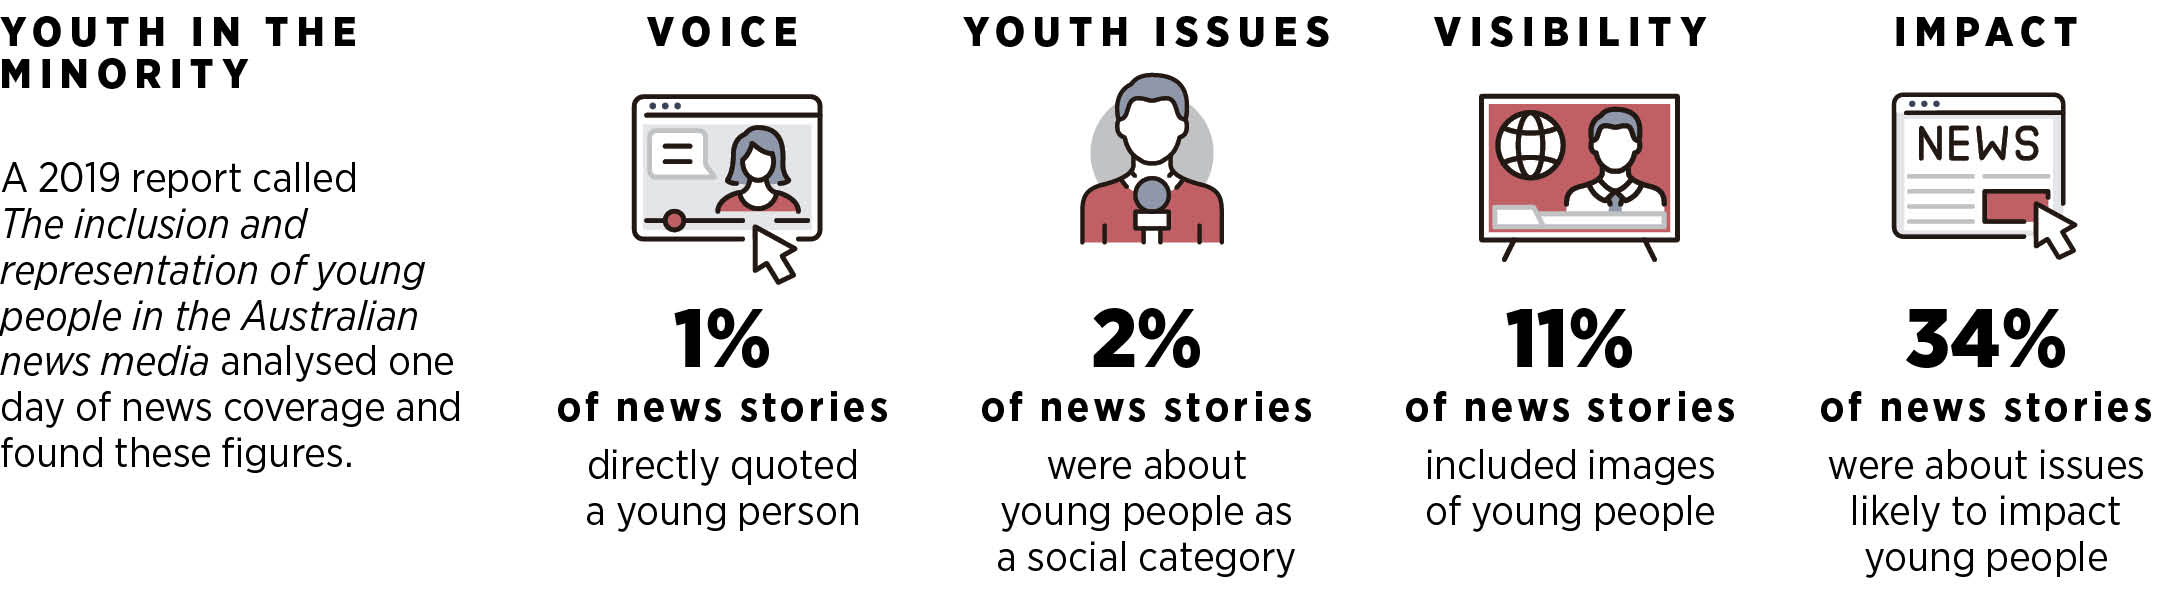 A 2019 report called The inclusion and representation of young people in the Australian news media analysed one day of news coverage and found these figures.